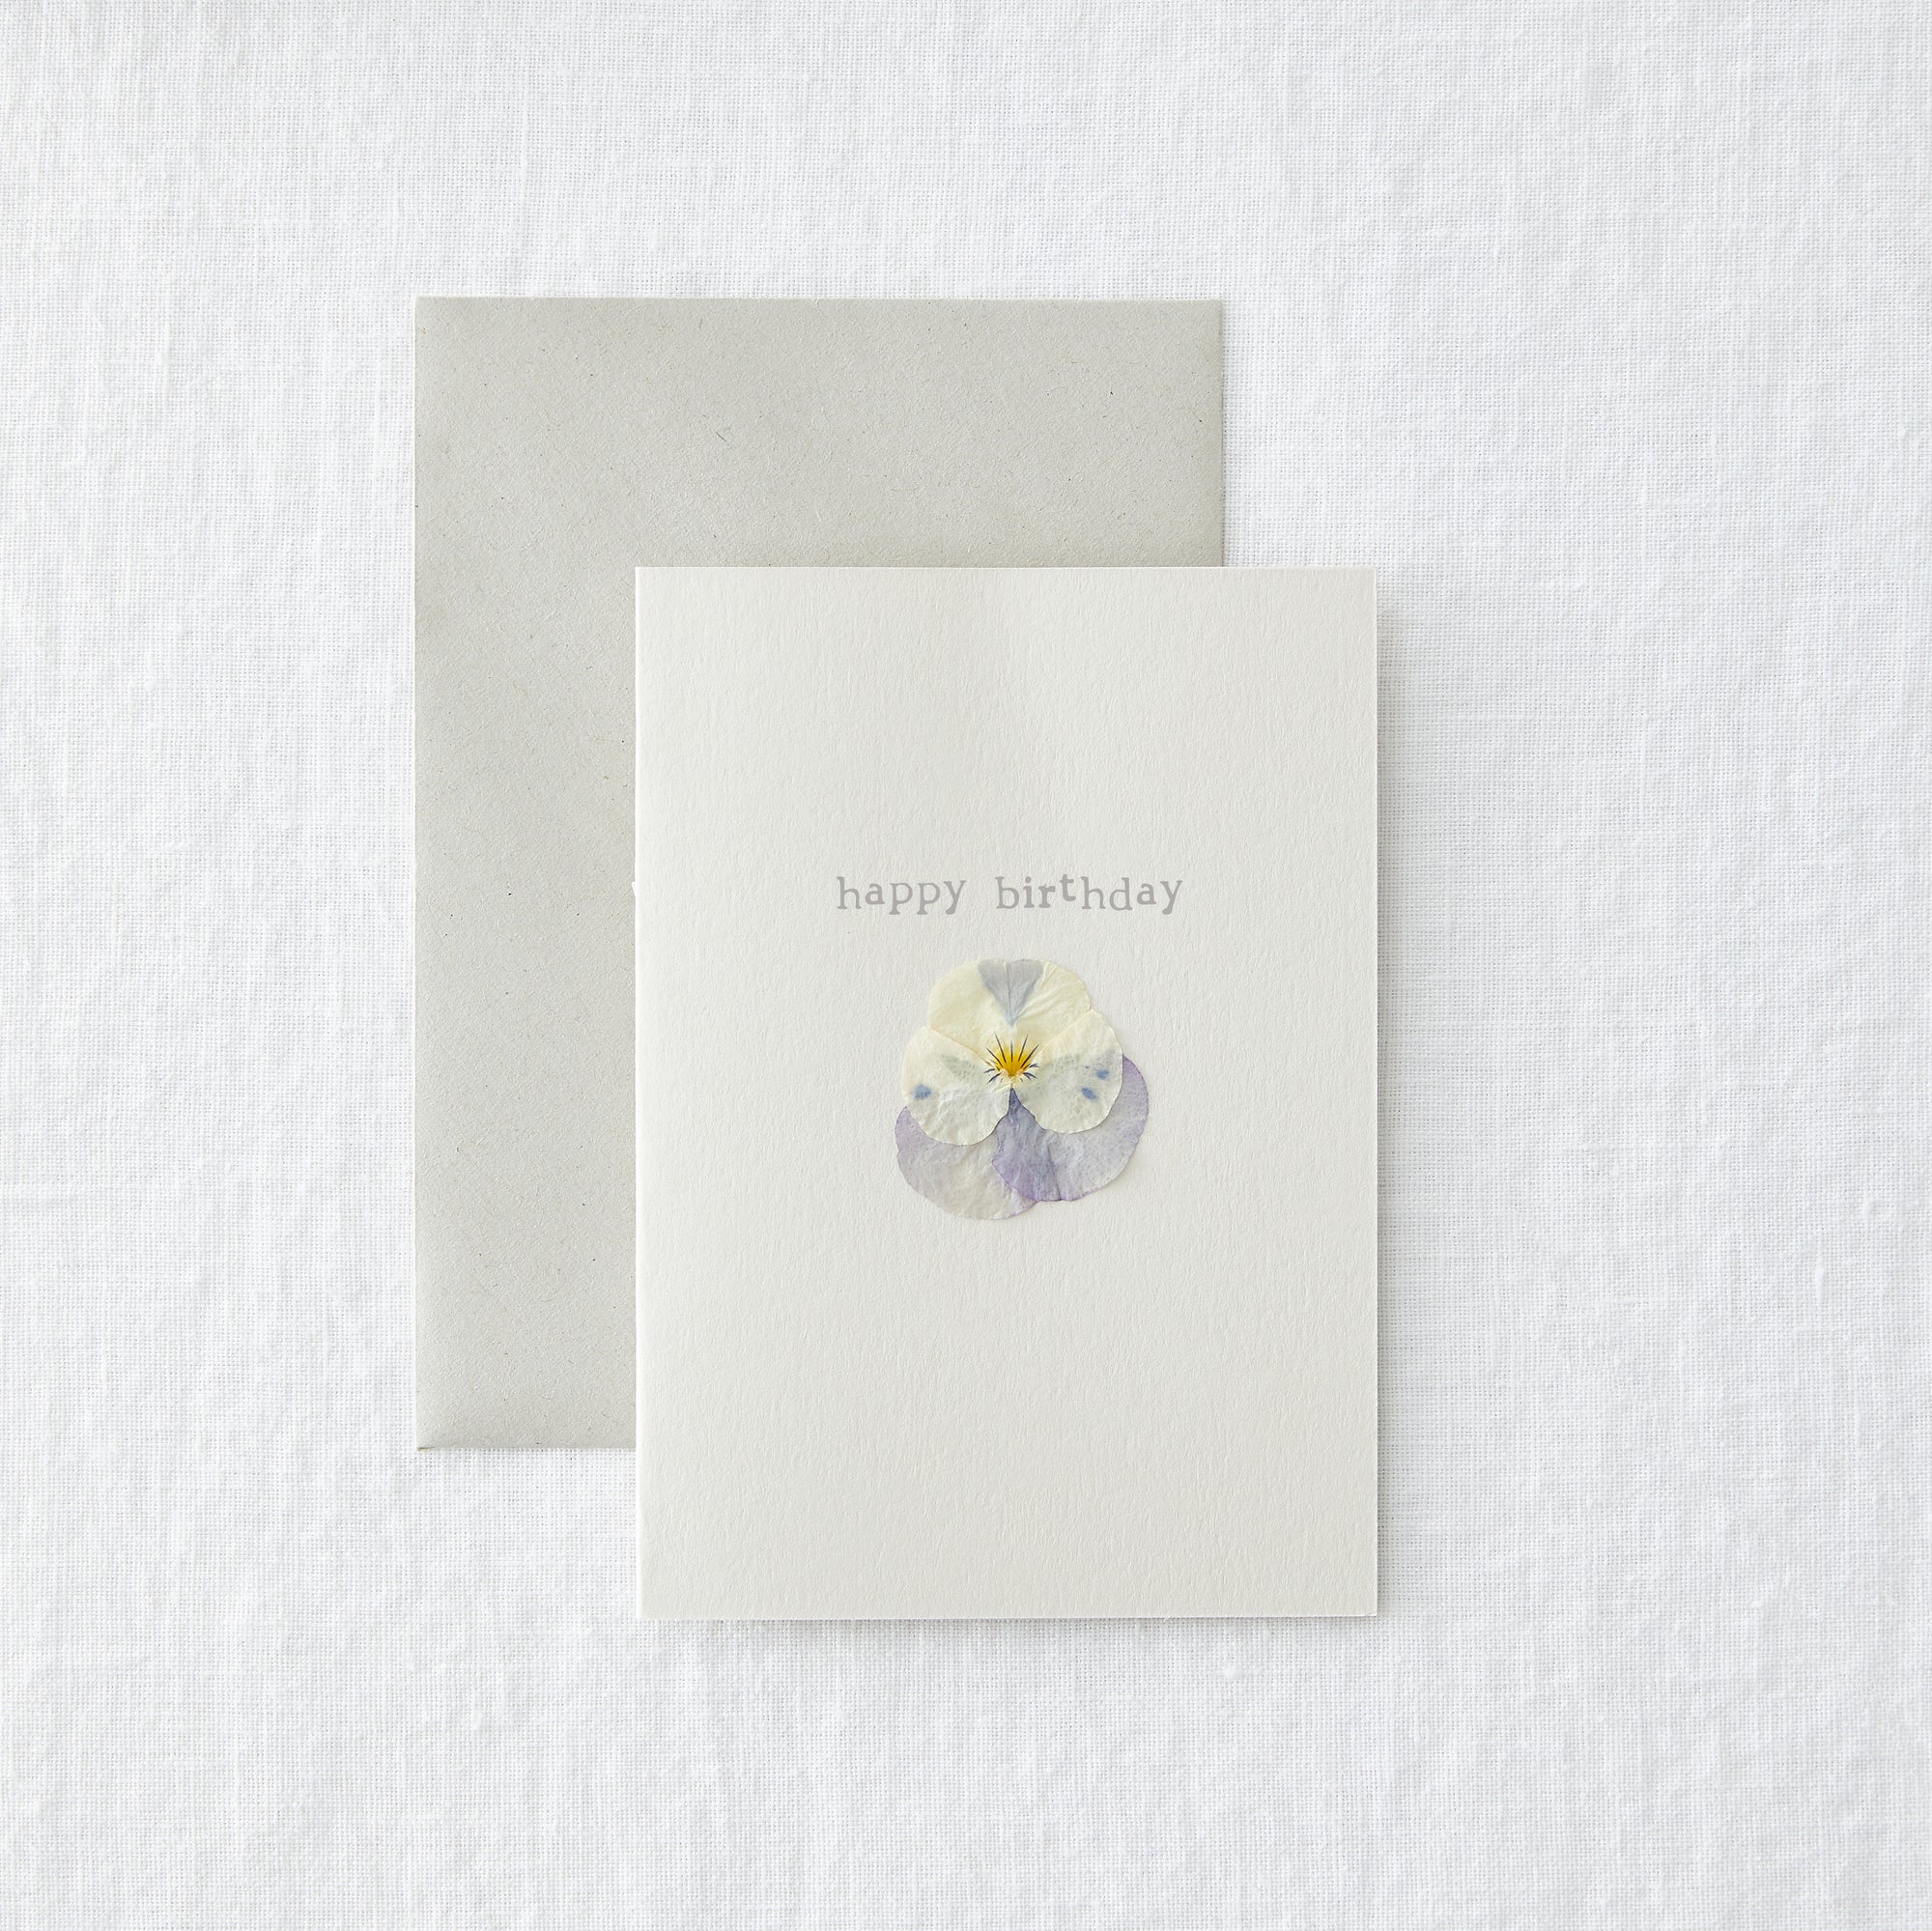 Happy Birthday Pressed Pansy Card by penny black